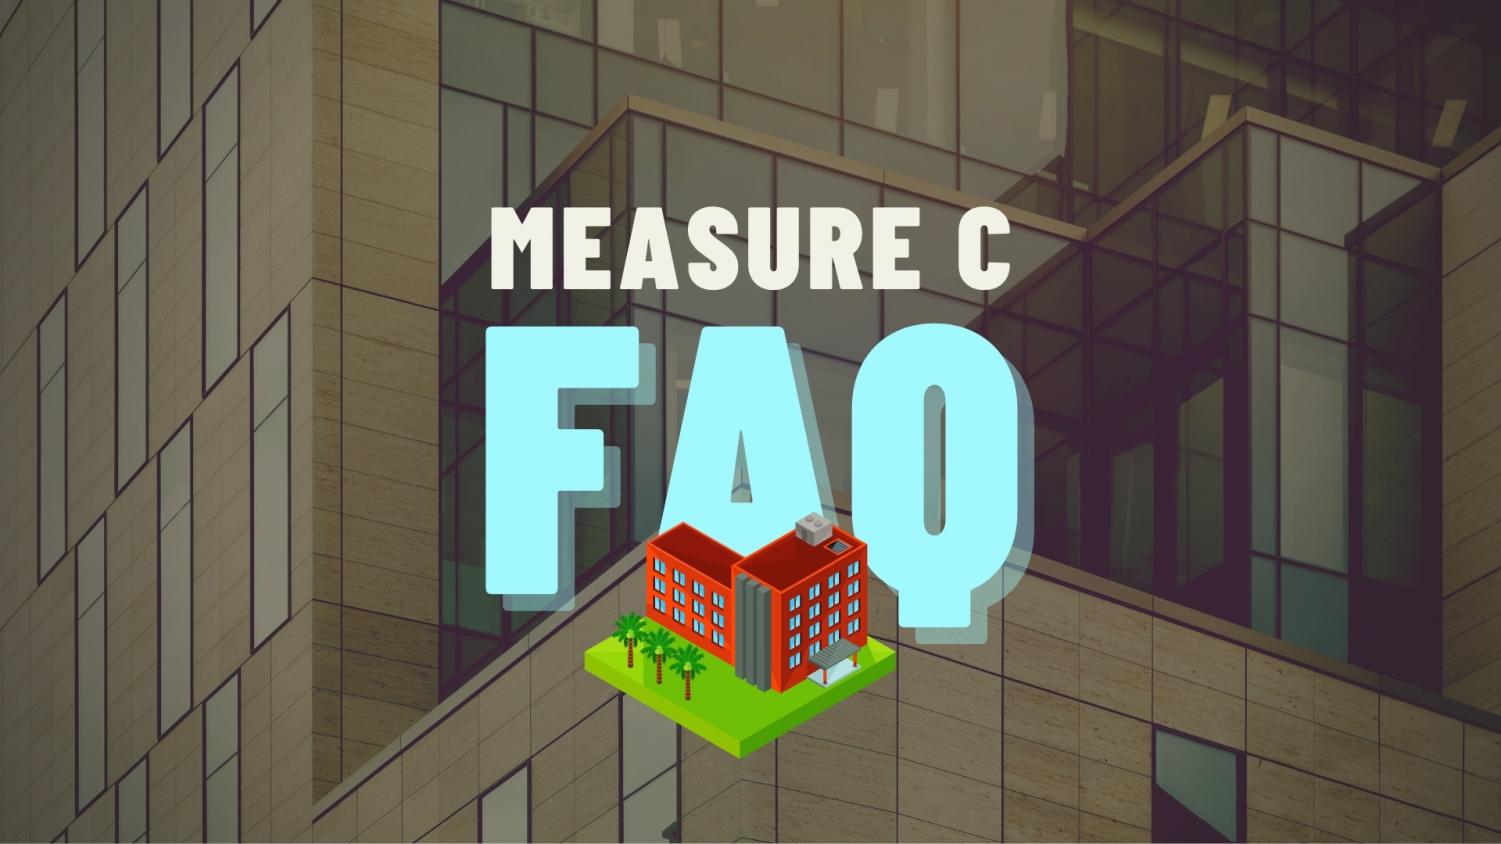 Measure C if passed, would establish an elected rent control board that would regulate rent for affected units and limit the ability of landlords to terminate leases, according to the impartial analysis of Measure C prepared by Sacramento’s city attorney. 